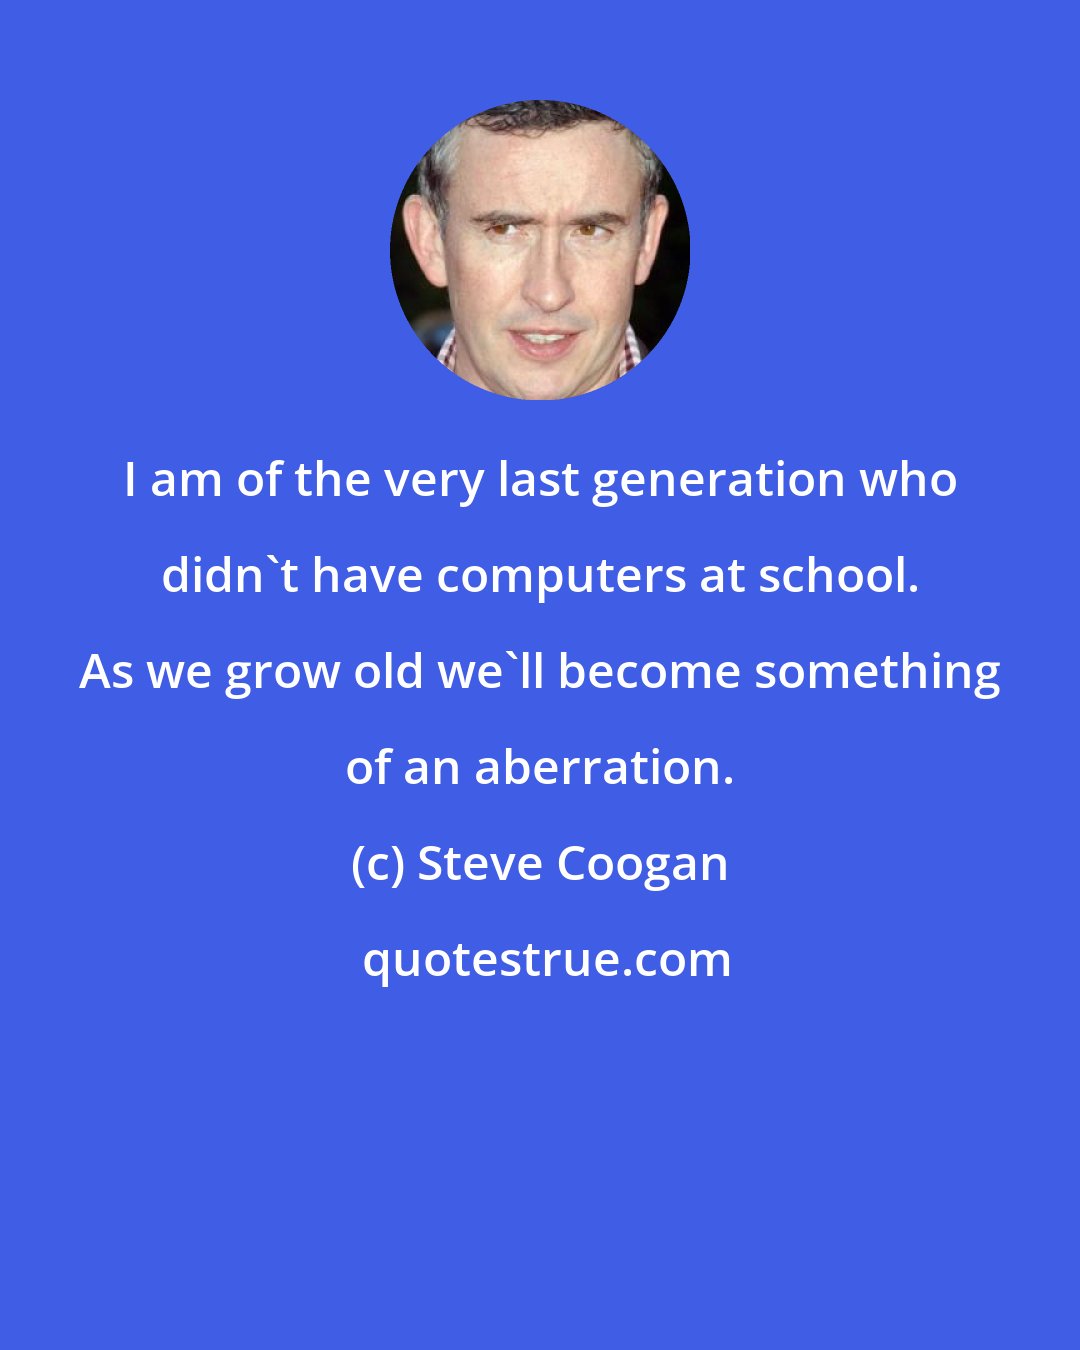 Steve Coogan: I am of the very last generation who didn't have computers at school. As we grow old we'll become something of an aberration.